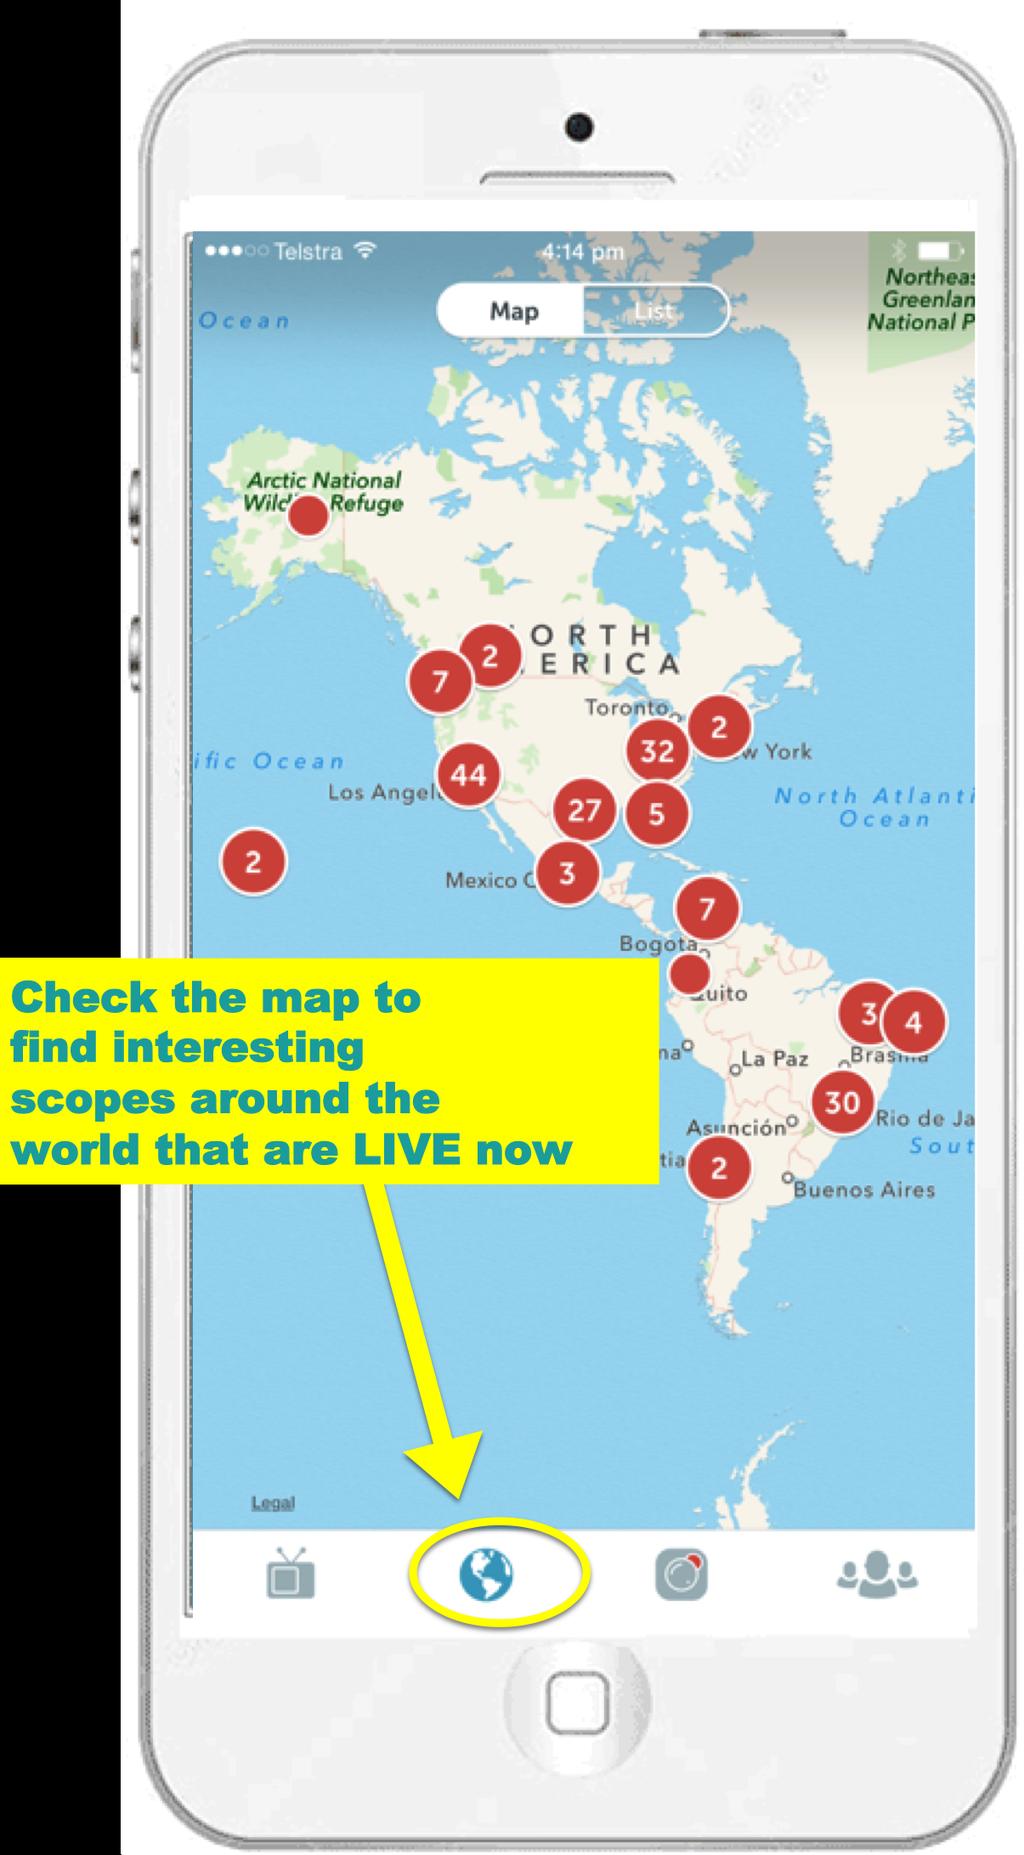 Cont 4) World Map You can also look at the world map to check out scopes in different cities and countries.